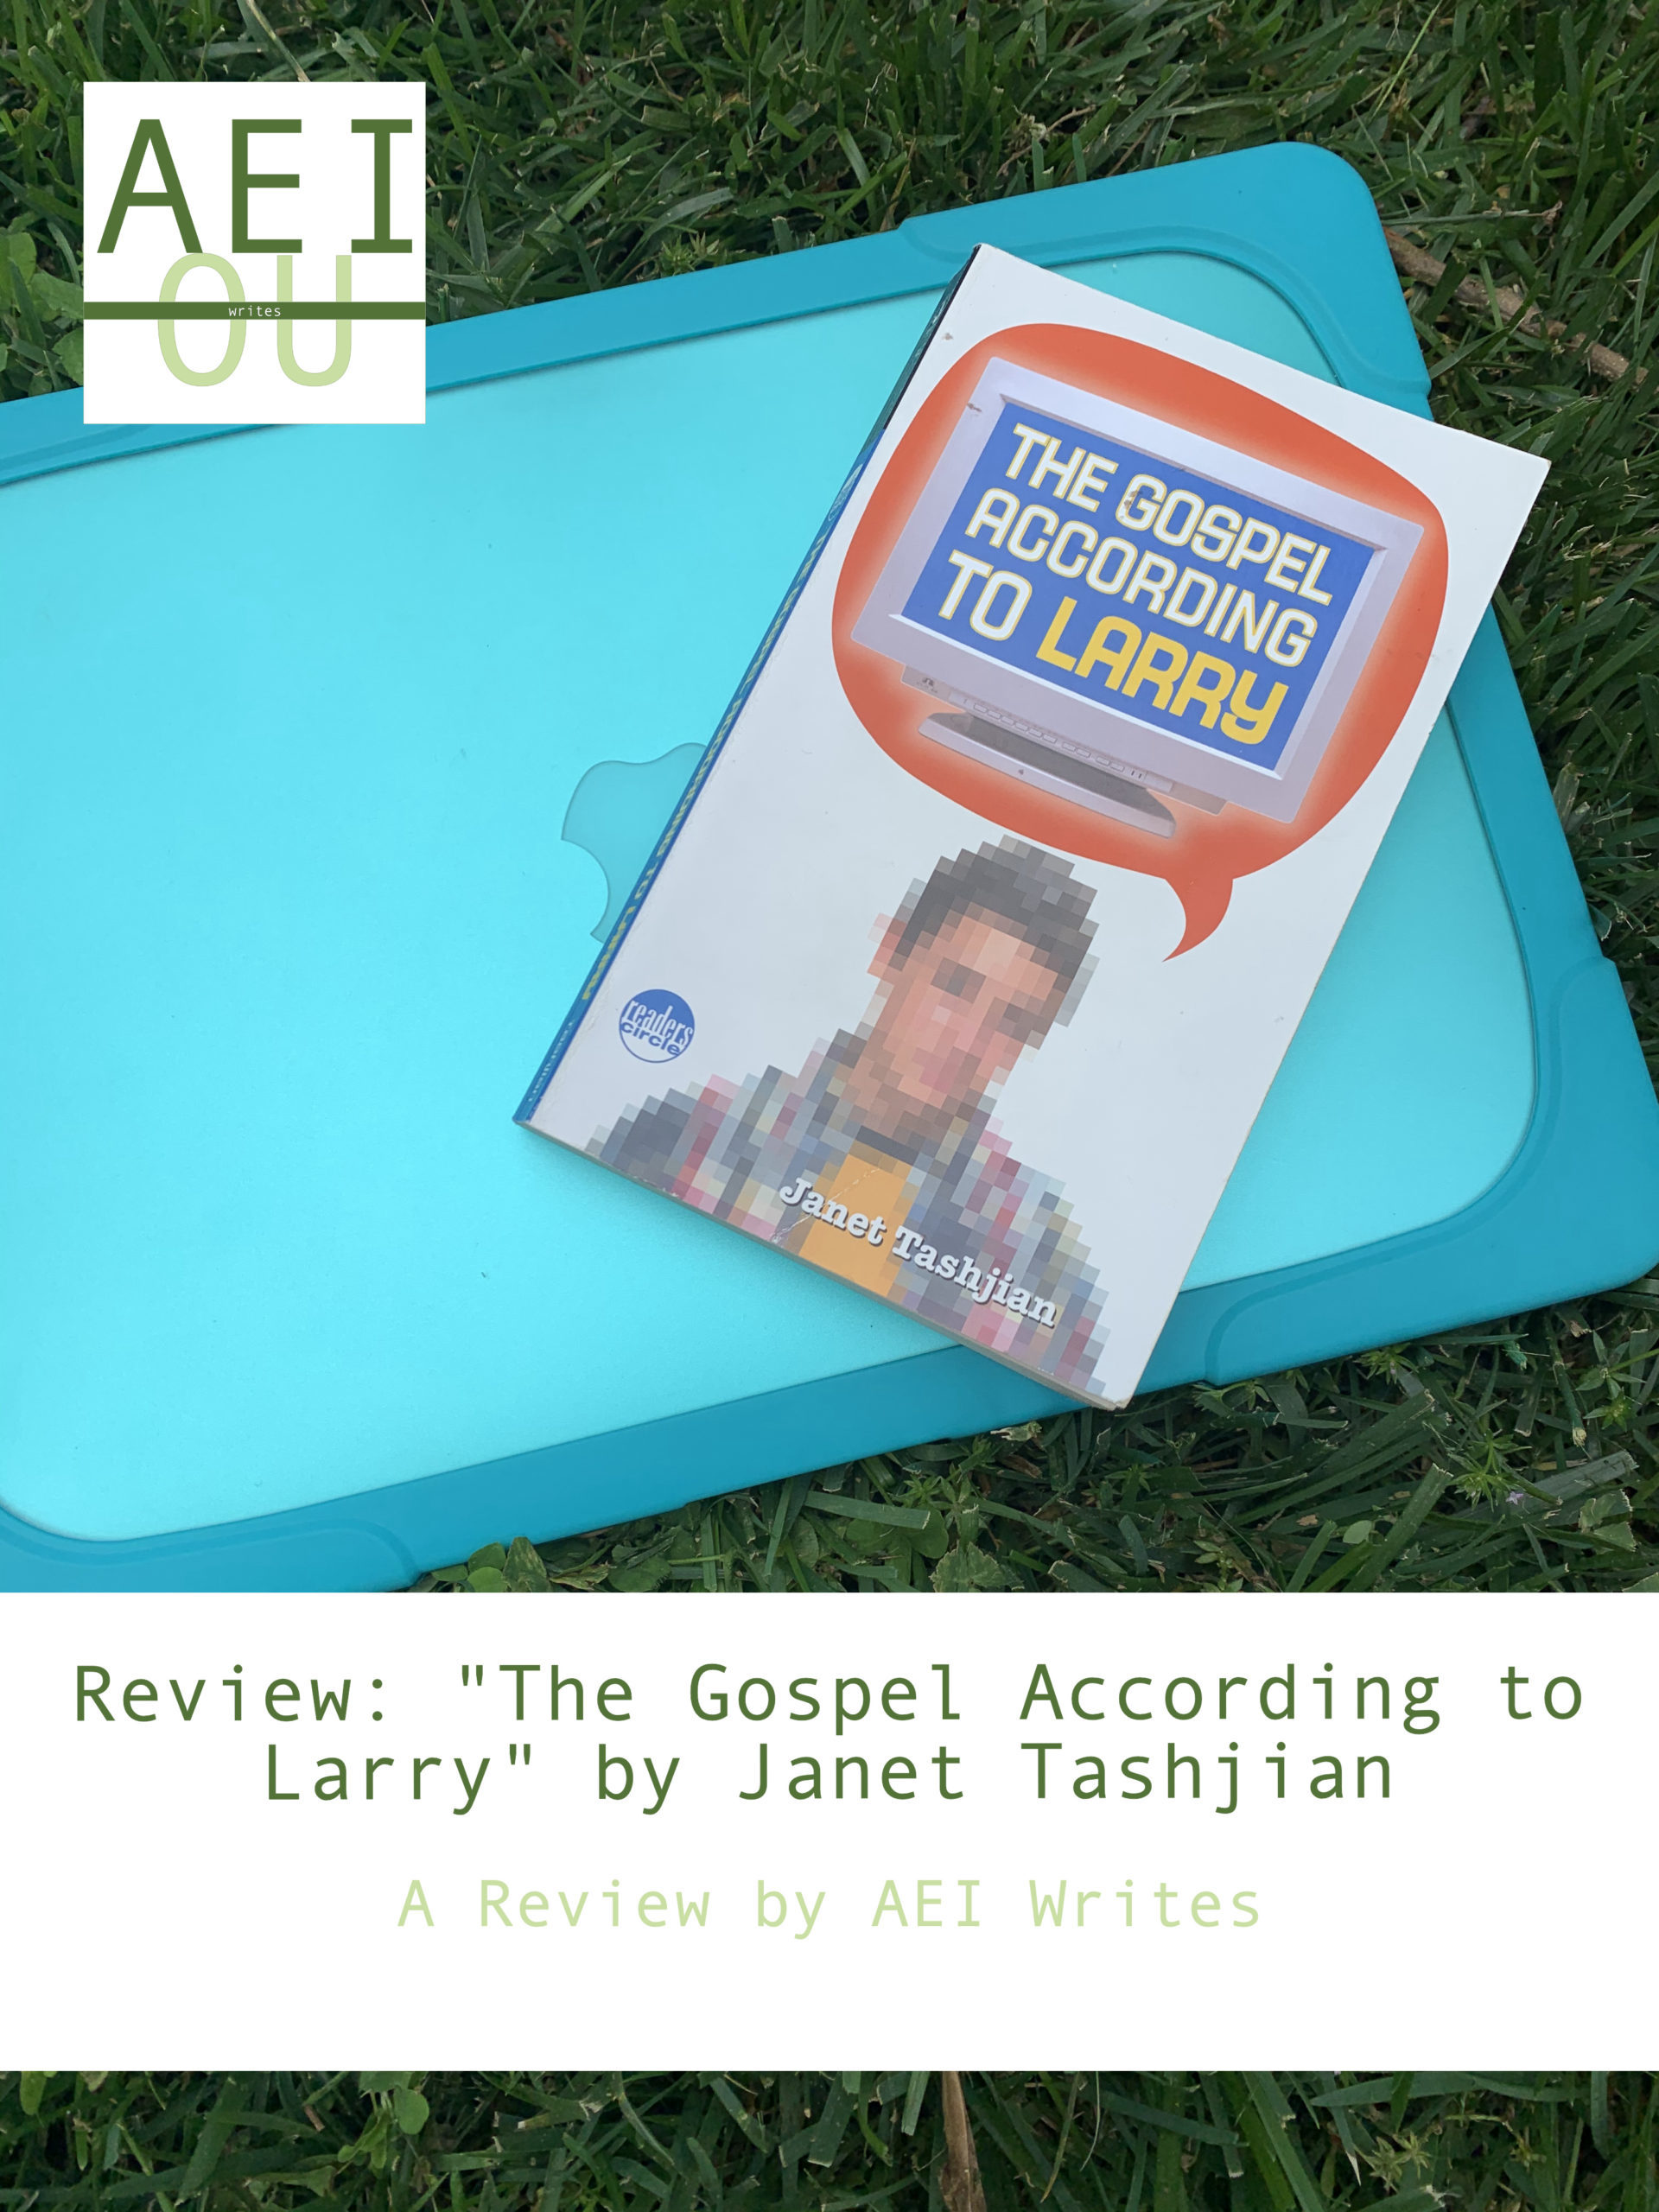 Review: “The Gospel According to Larry”